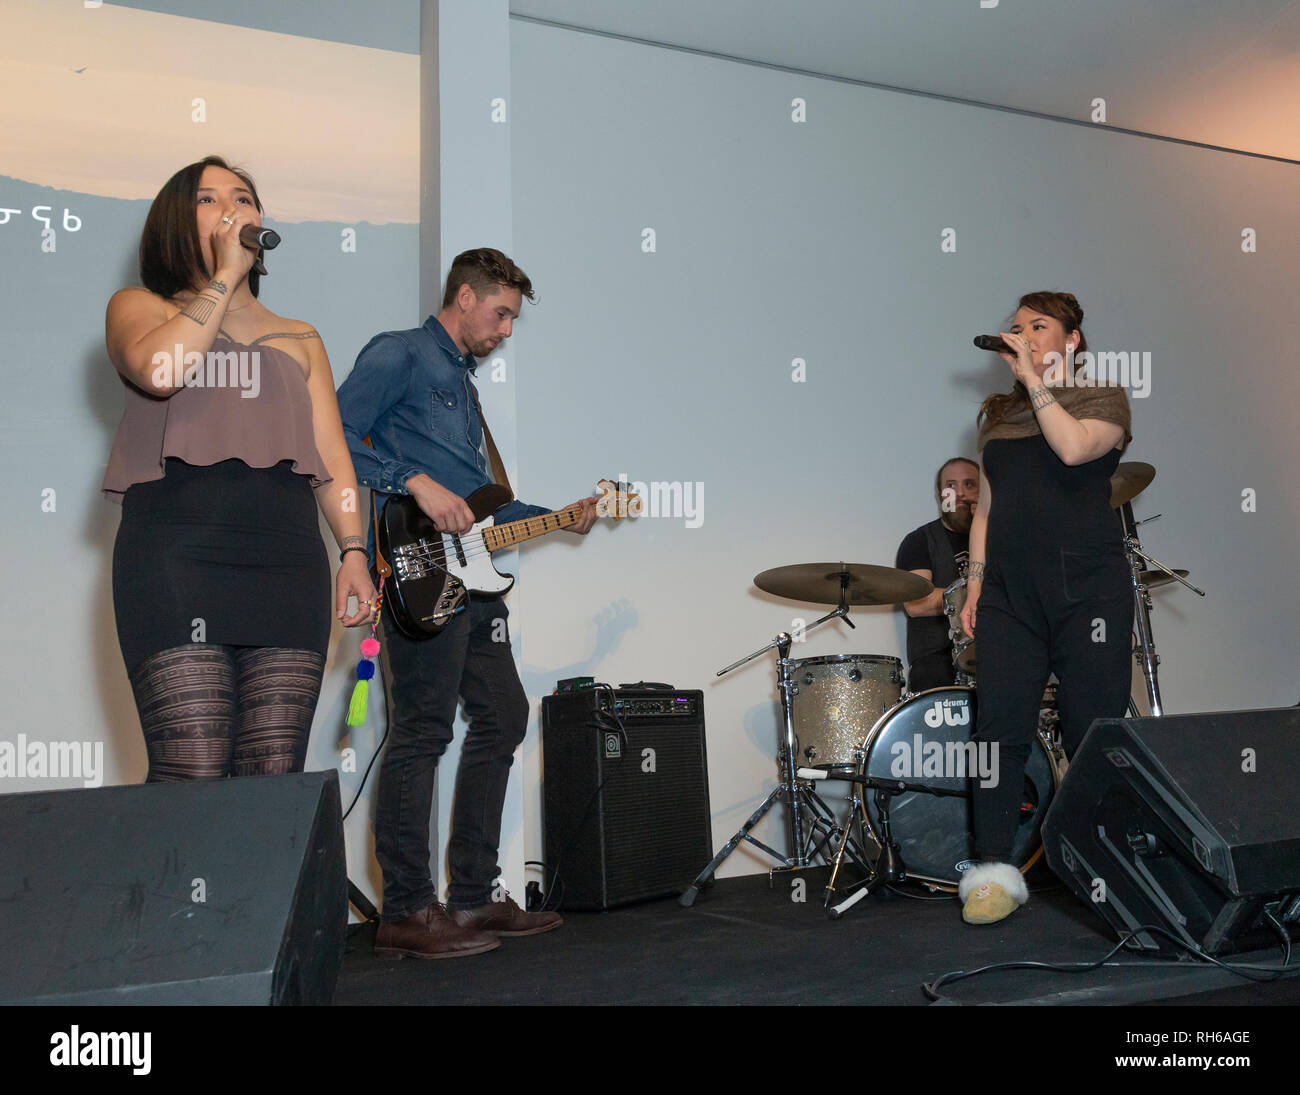 New York, NY - January 31, 2019: The Jerry Cans band performs during Canada Goose Celebrates the Launch of Project Atigi at Studio 525 Credit: lev radin/Alamy Live News Stock Photo